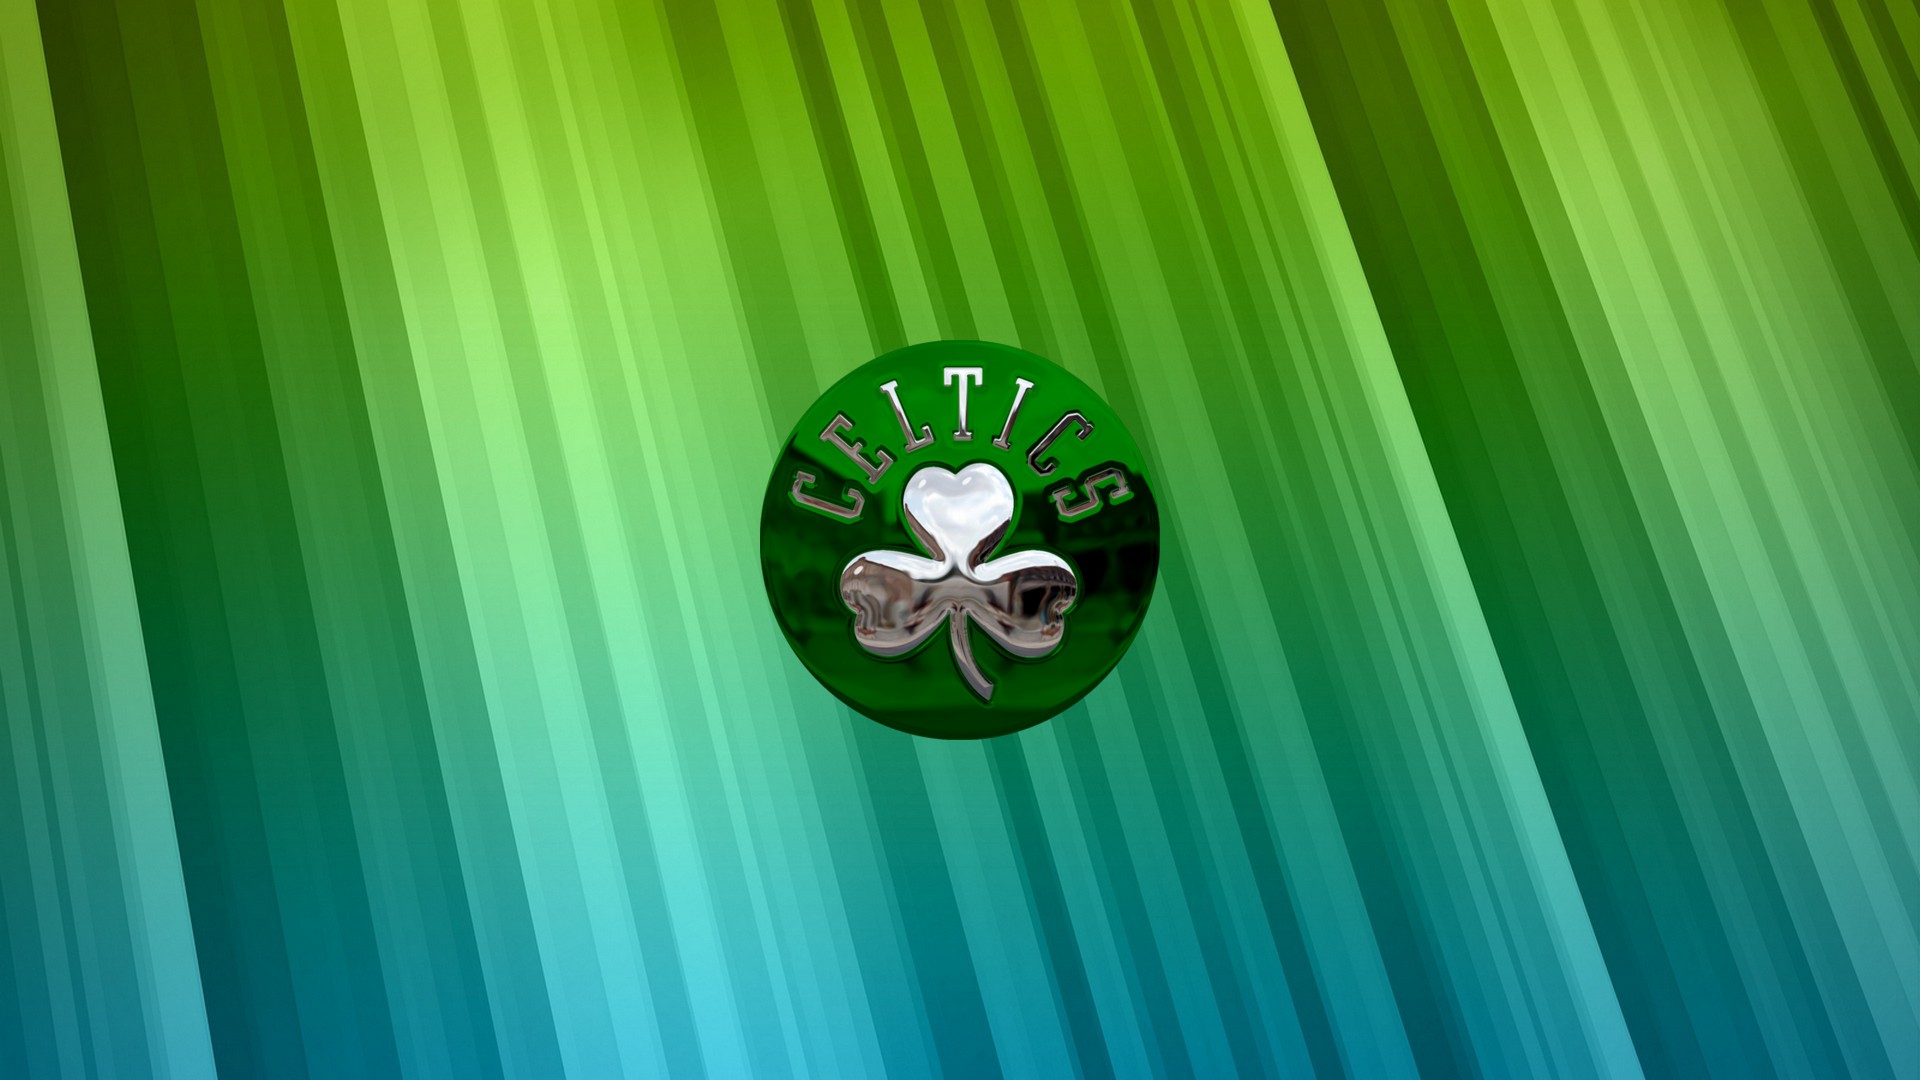 HD Boston Celtics Logo Backgrounds with image dimensions 1920x1080 pixel. You can make this wallpaper for your Desktop Computer Backgrounds, Windows or Mac Screensavers, iPhone Lock screen, Tablet or Android and another Mobile Phone device